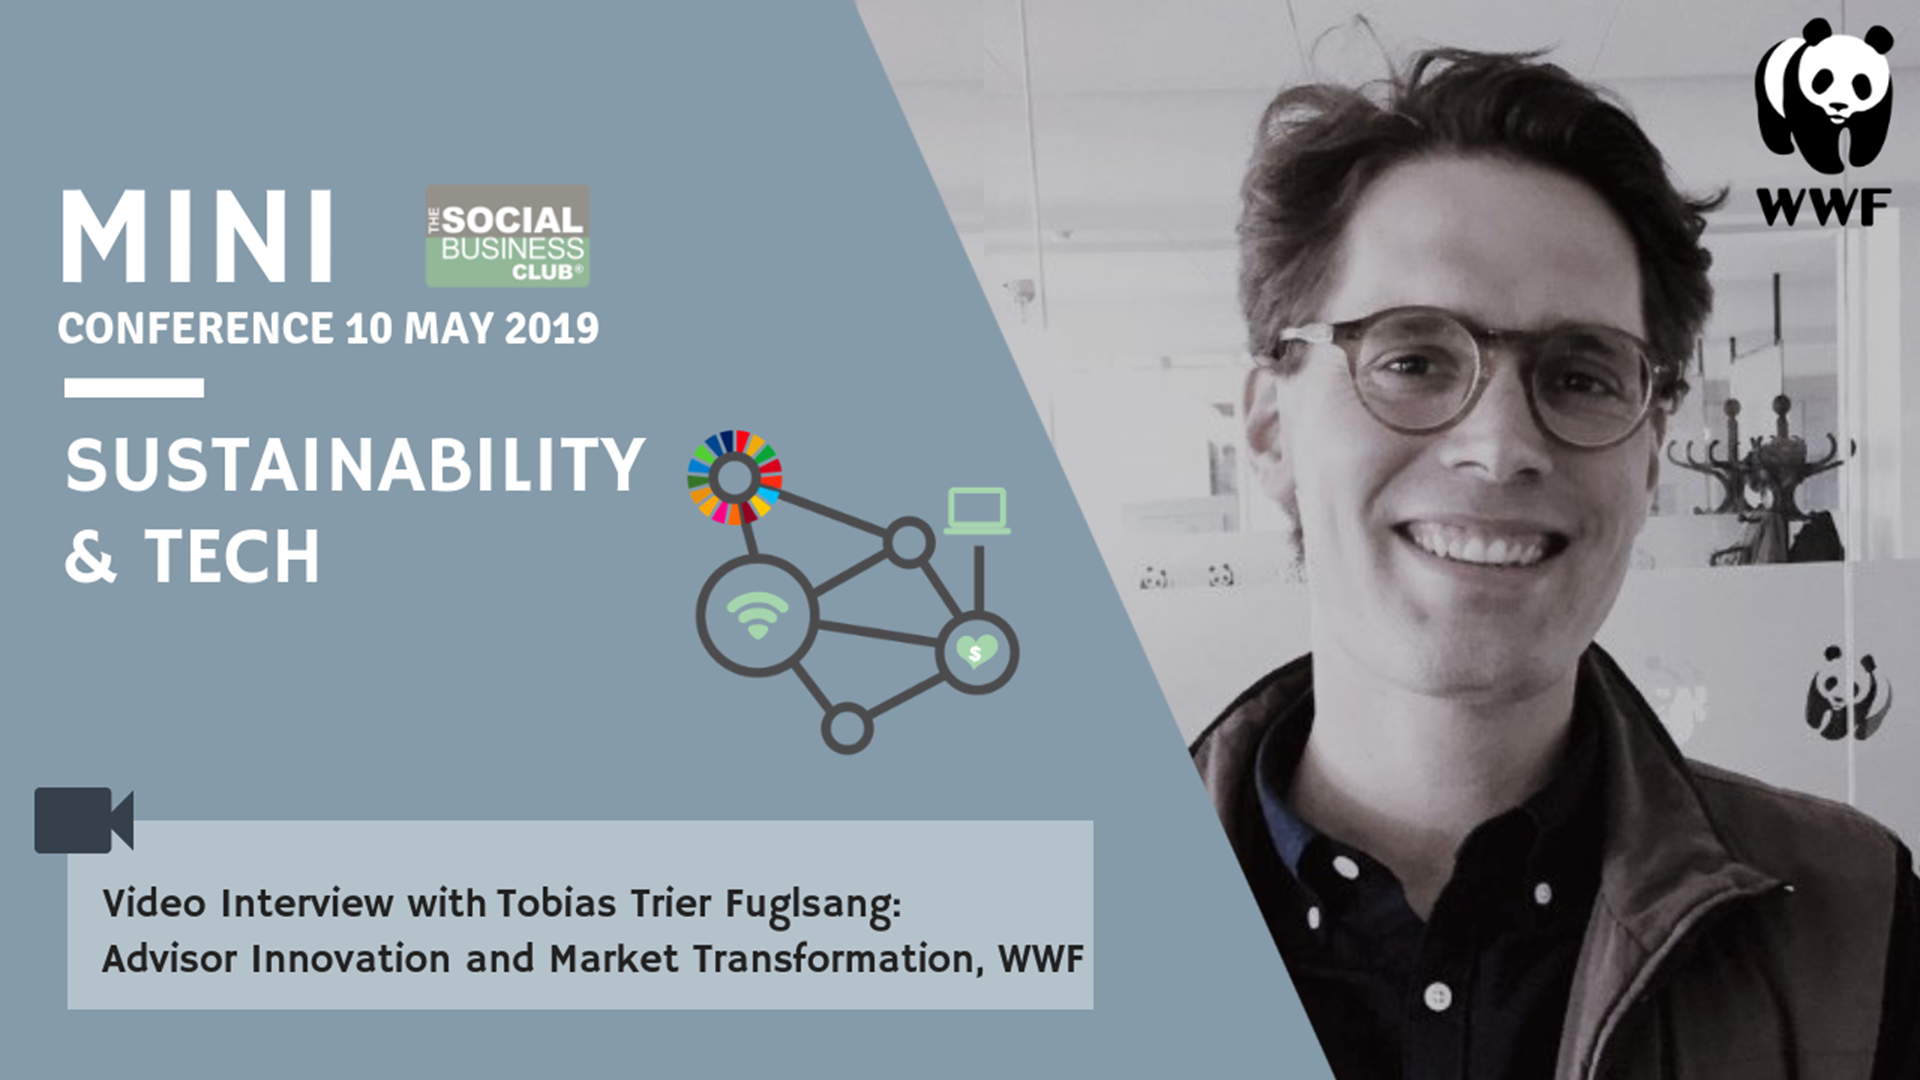 Interview with Tobias Trier Fuglsang (WWF)